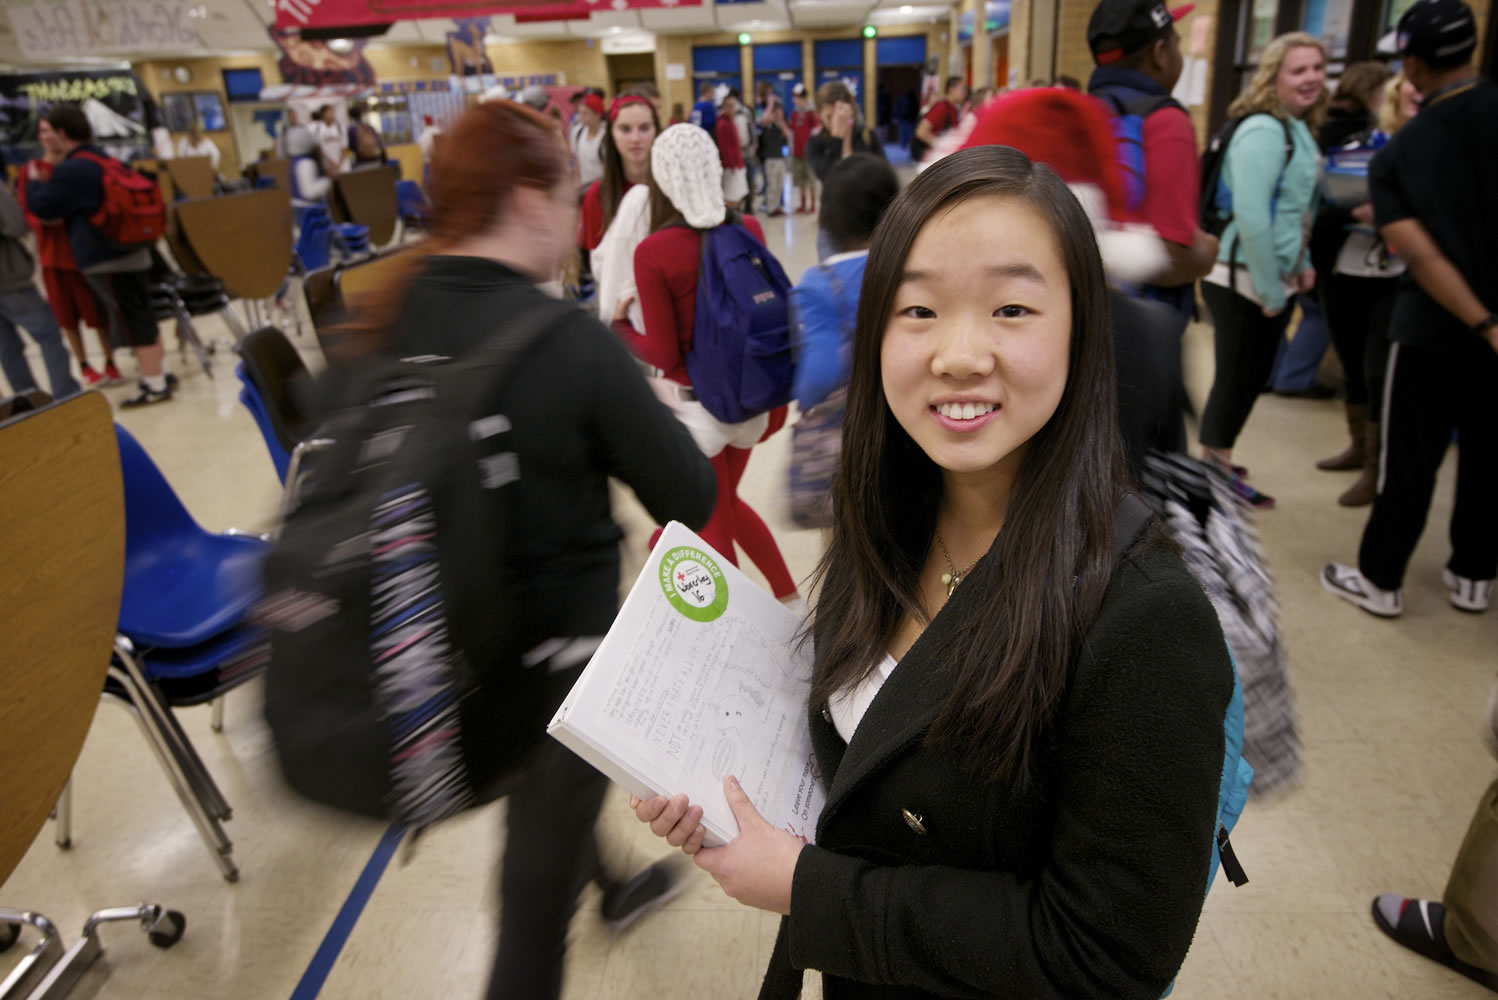 Waverley He, 16, a junior at Mountain View High School, scored a perfect 2400 on her SAT test.